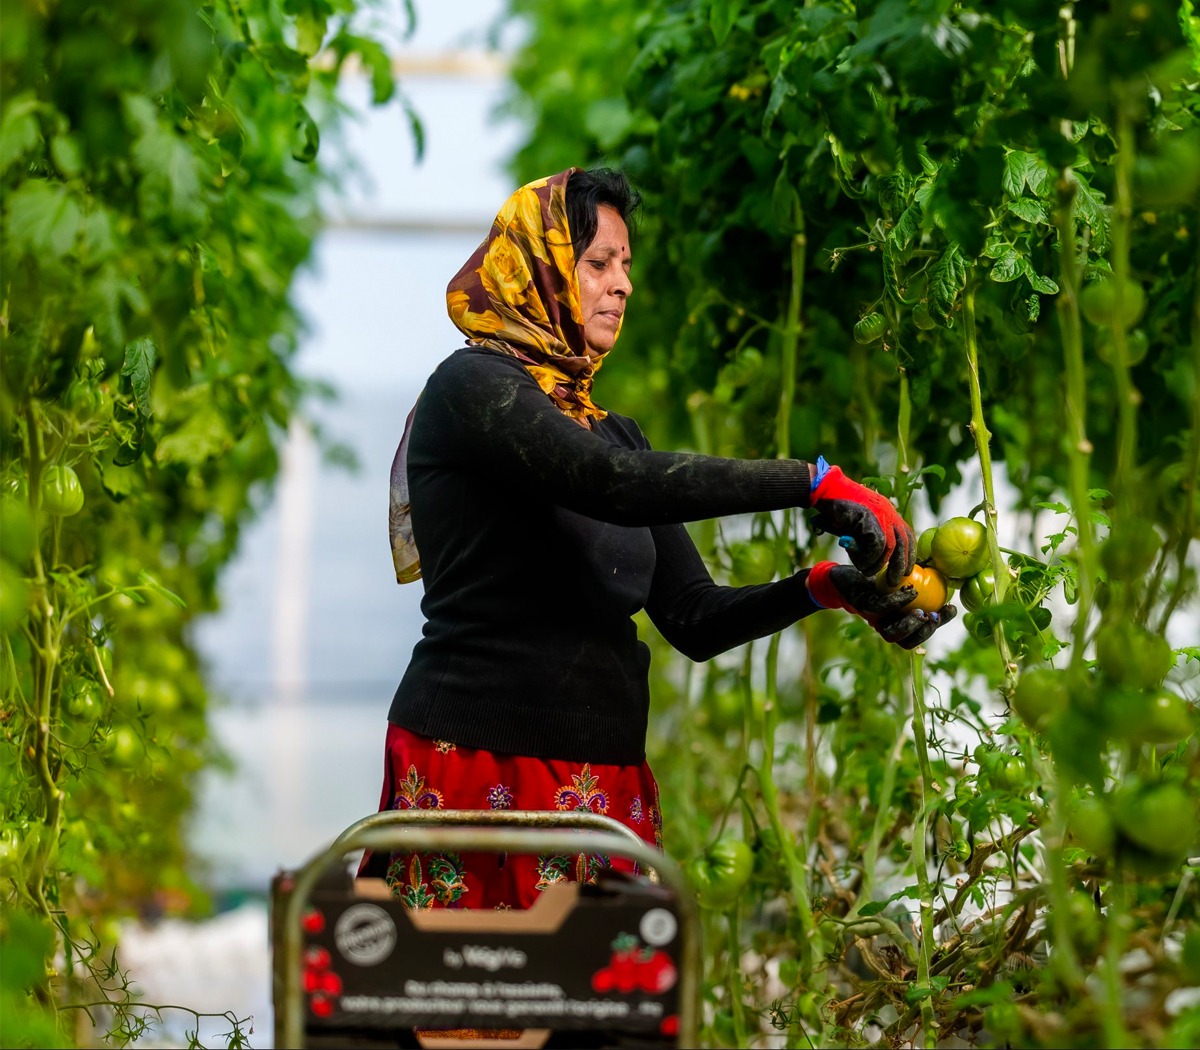 woman-harvesting-vegetables-to-put-them-in-a-box